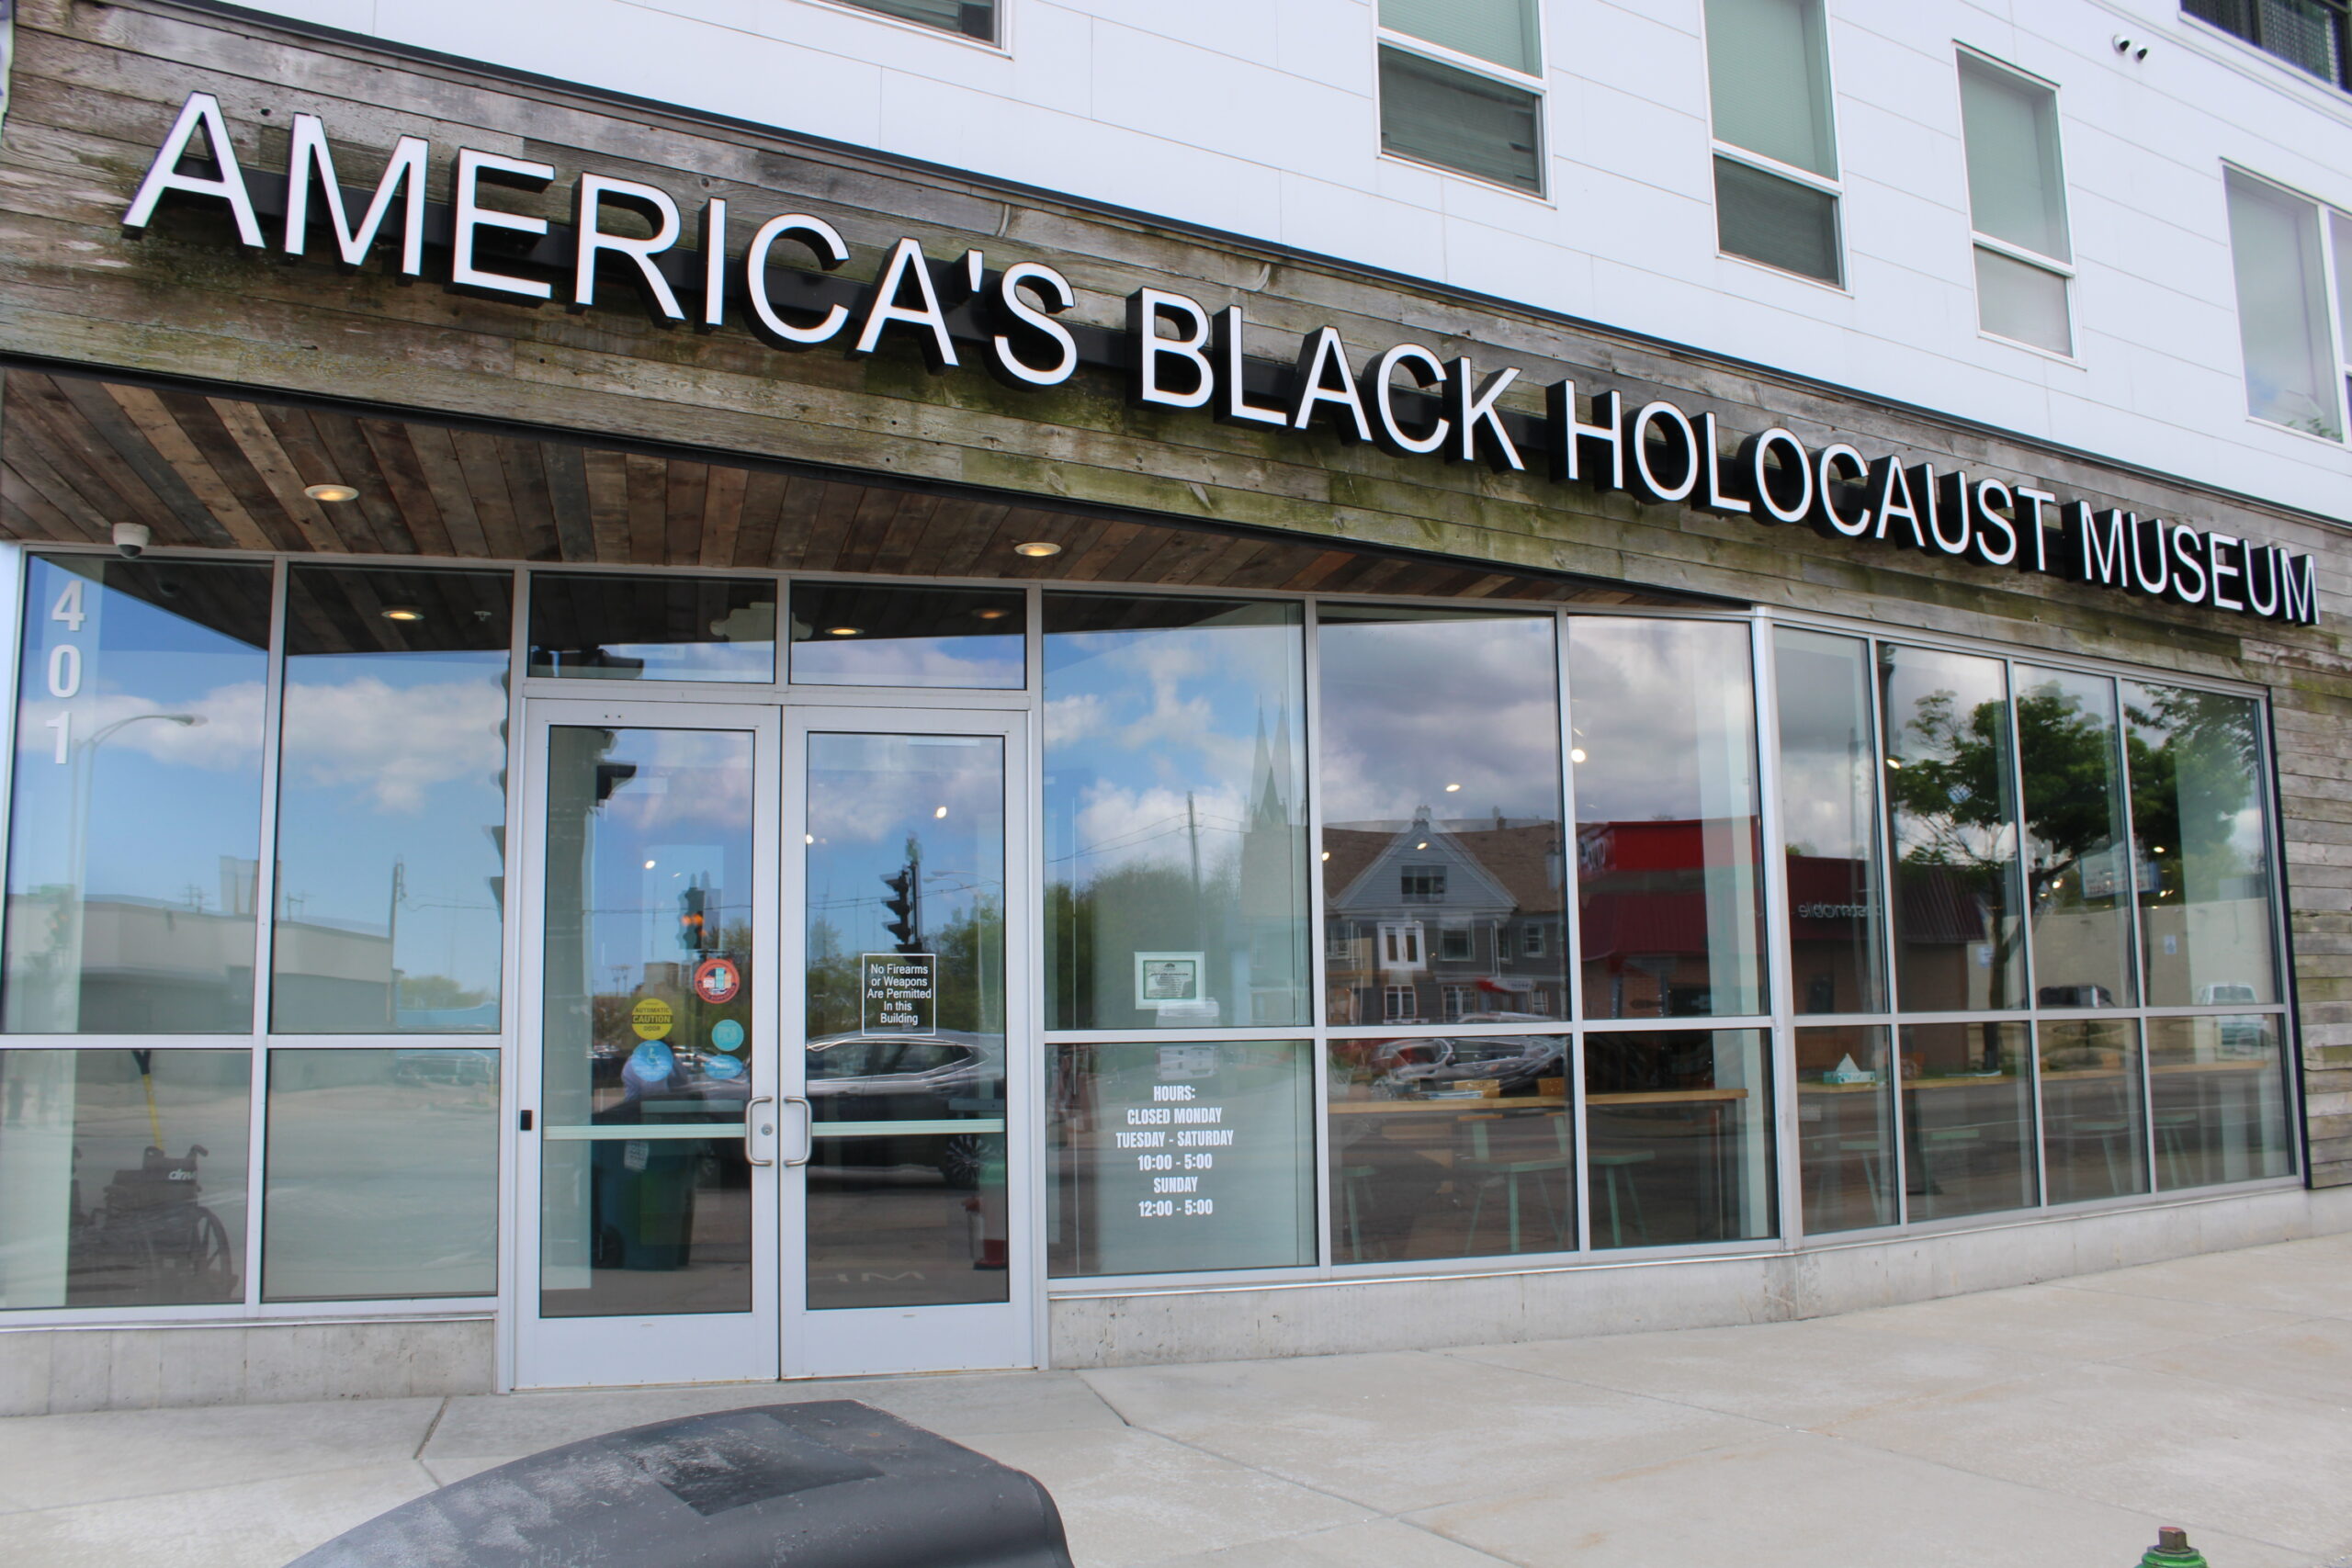 A building facade with large windows and a large signage with letters that read "America's Black Holocaust Museum"